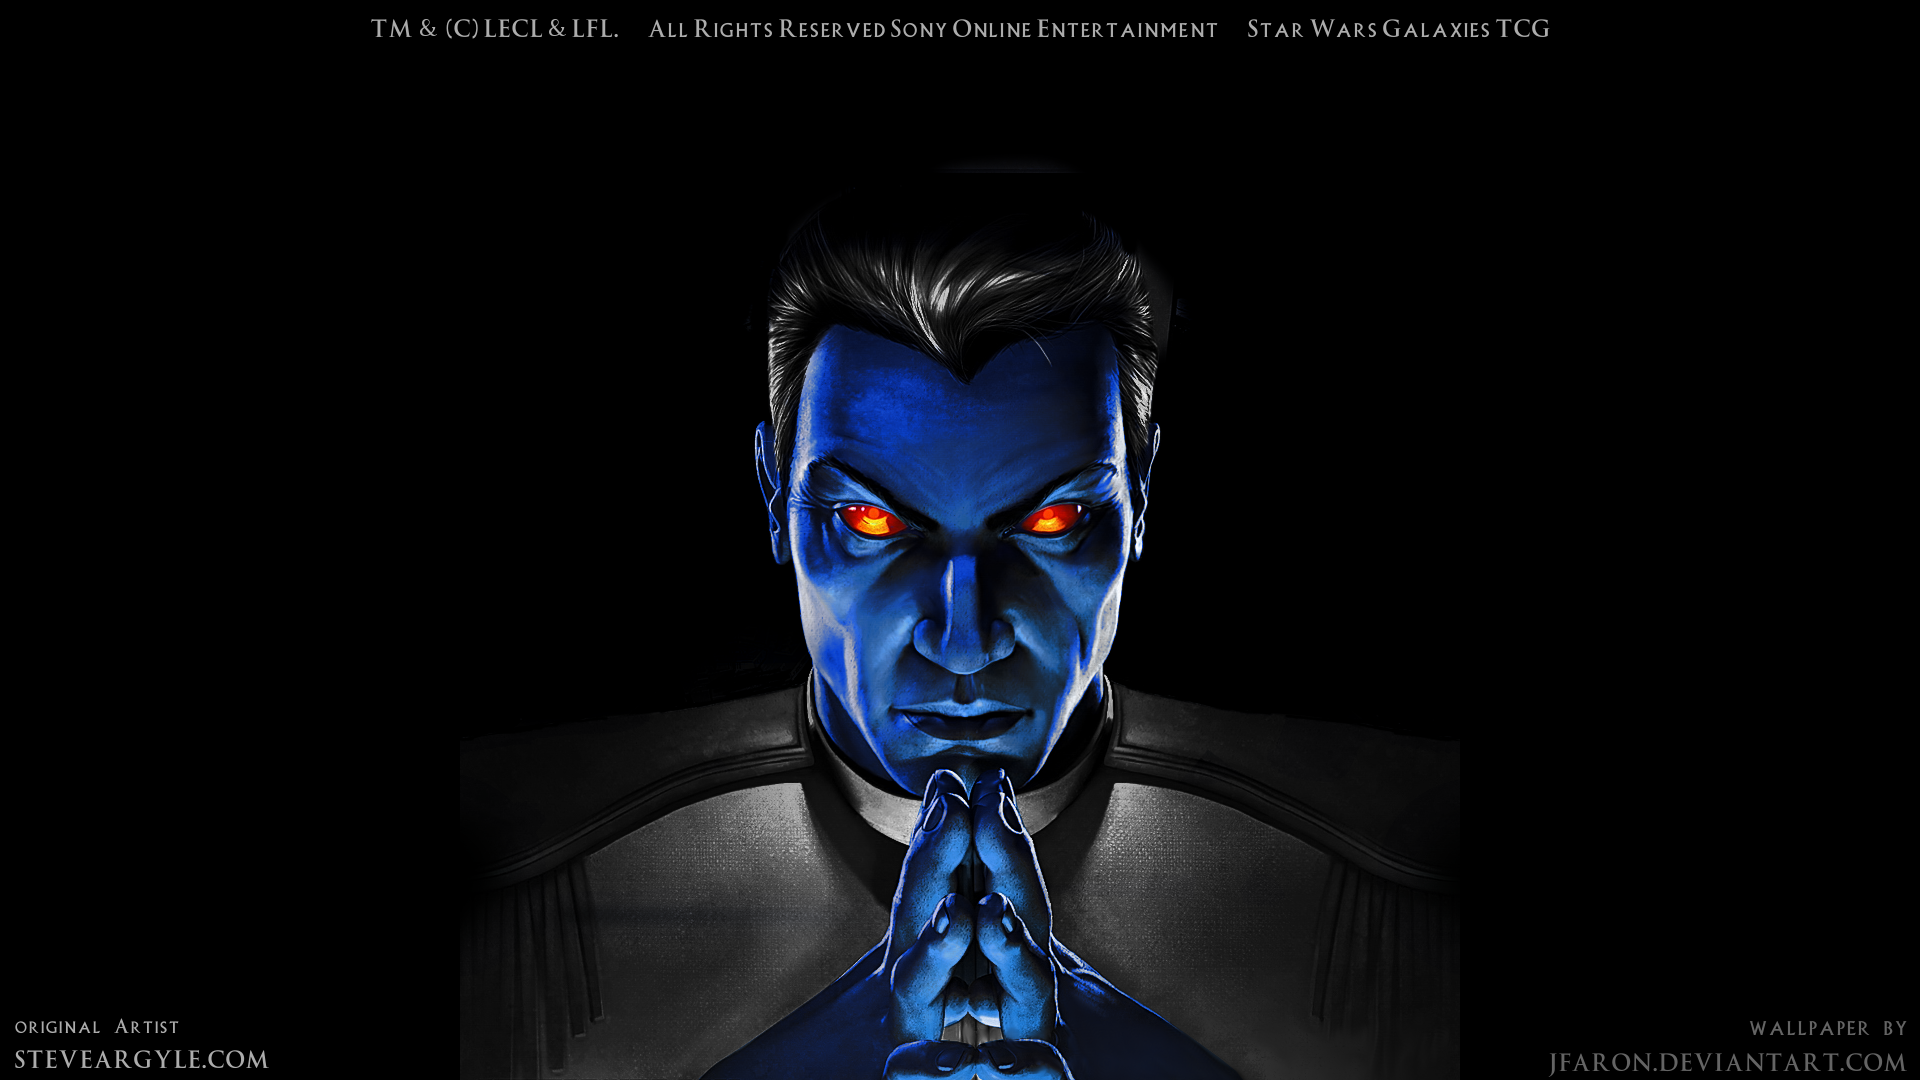 Who Is Grand Admiral Thrawn Star Wars Master Villain Revealed